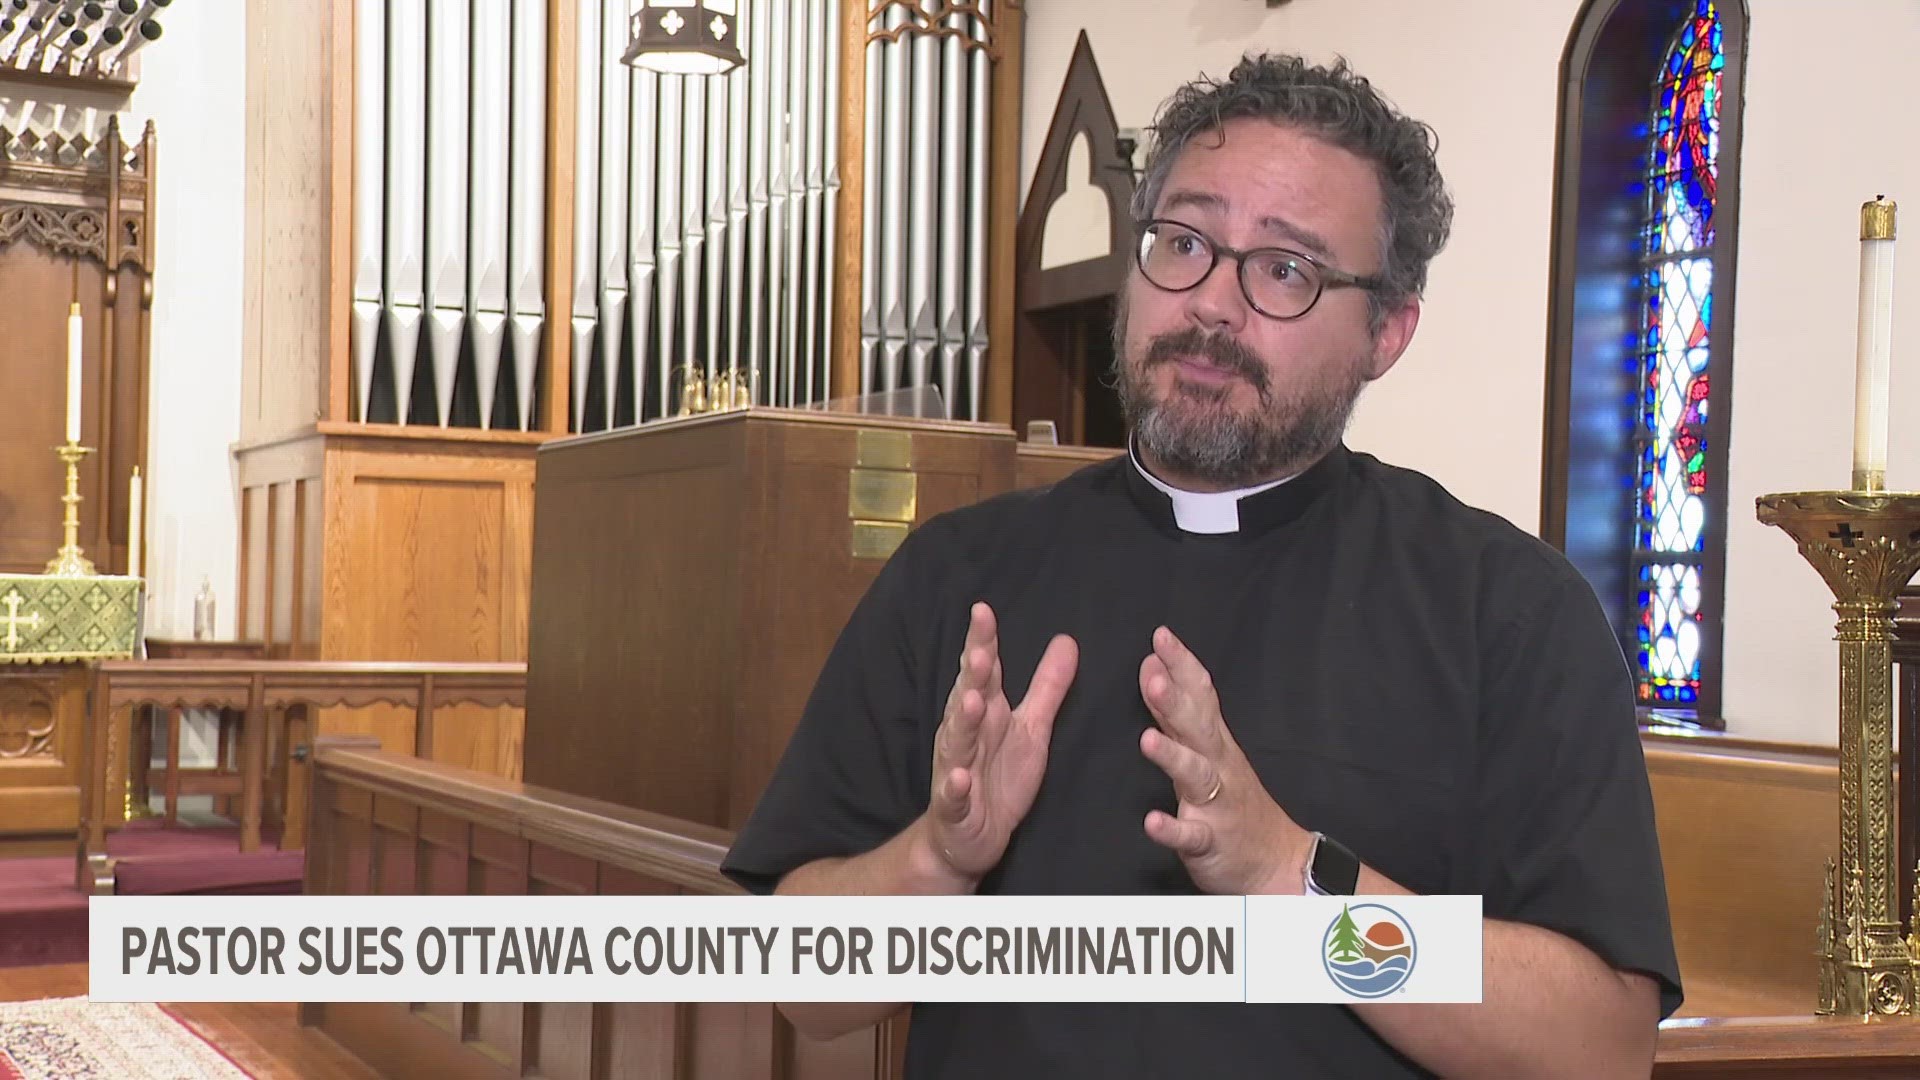 A reverend in Grand Haven has filed a lawsuit against Ottawa County, the county Board of Commissioners, and Chairperson Joe Moss for religious discrimination.